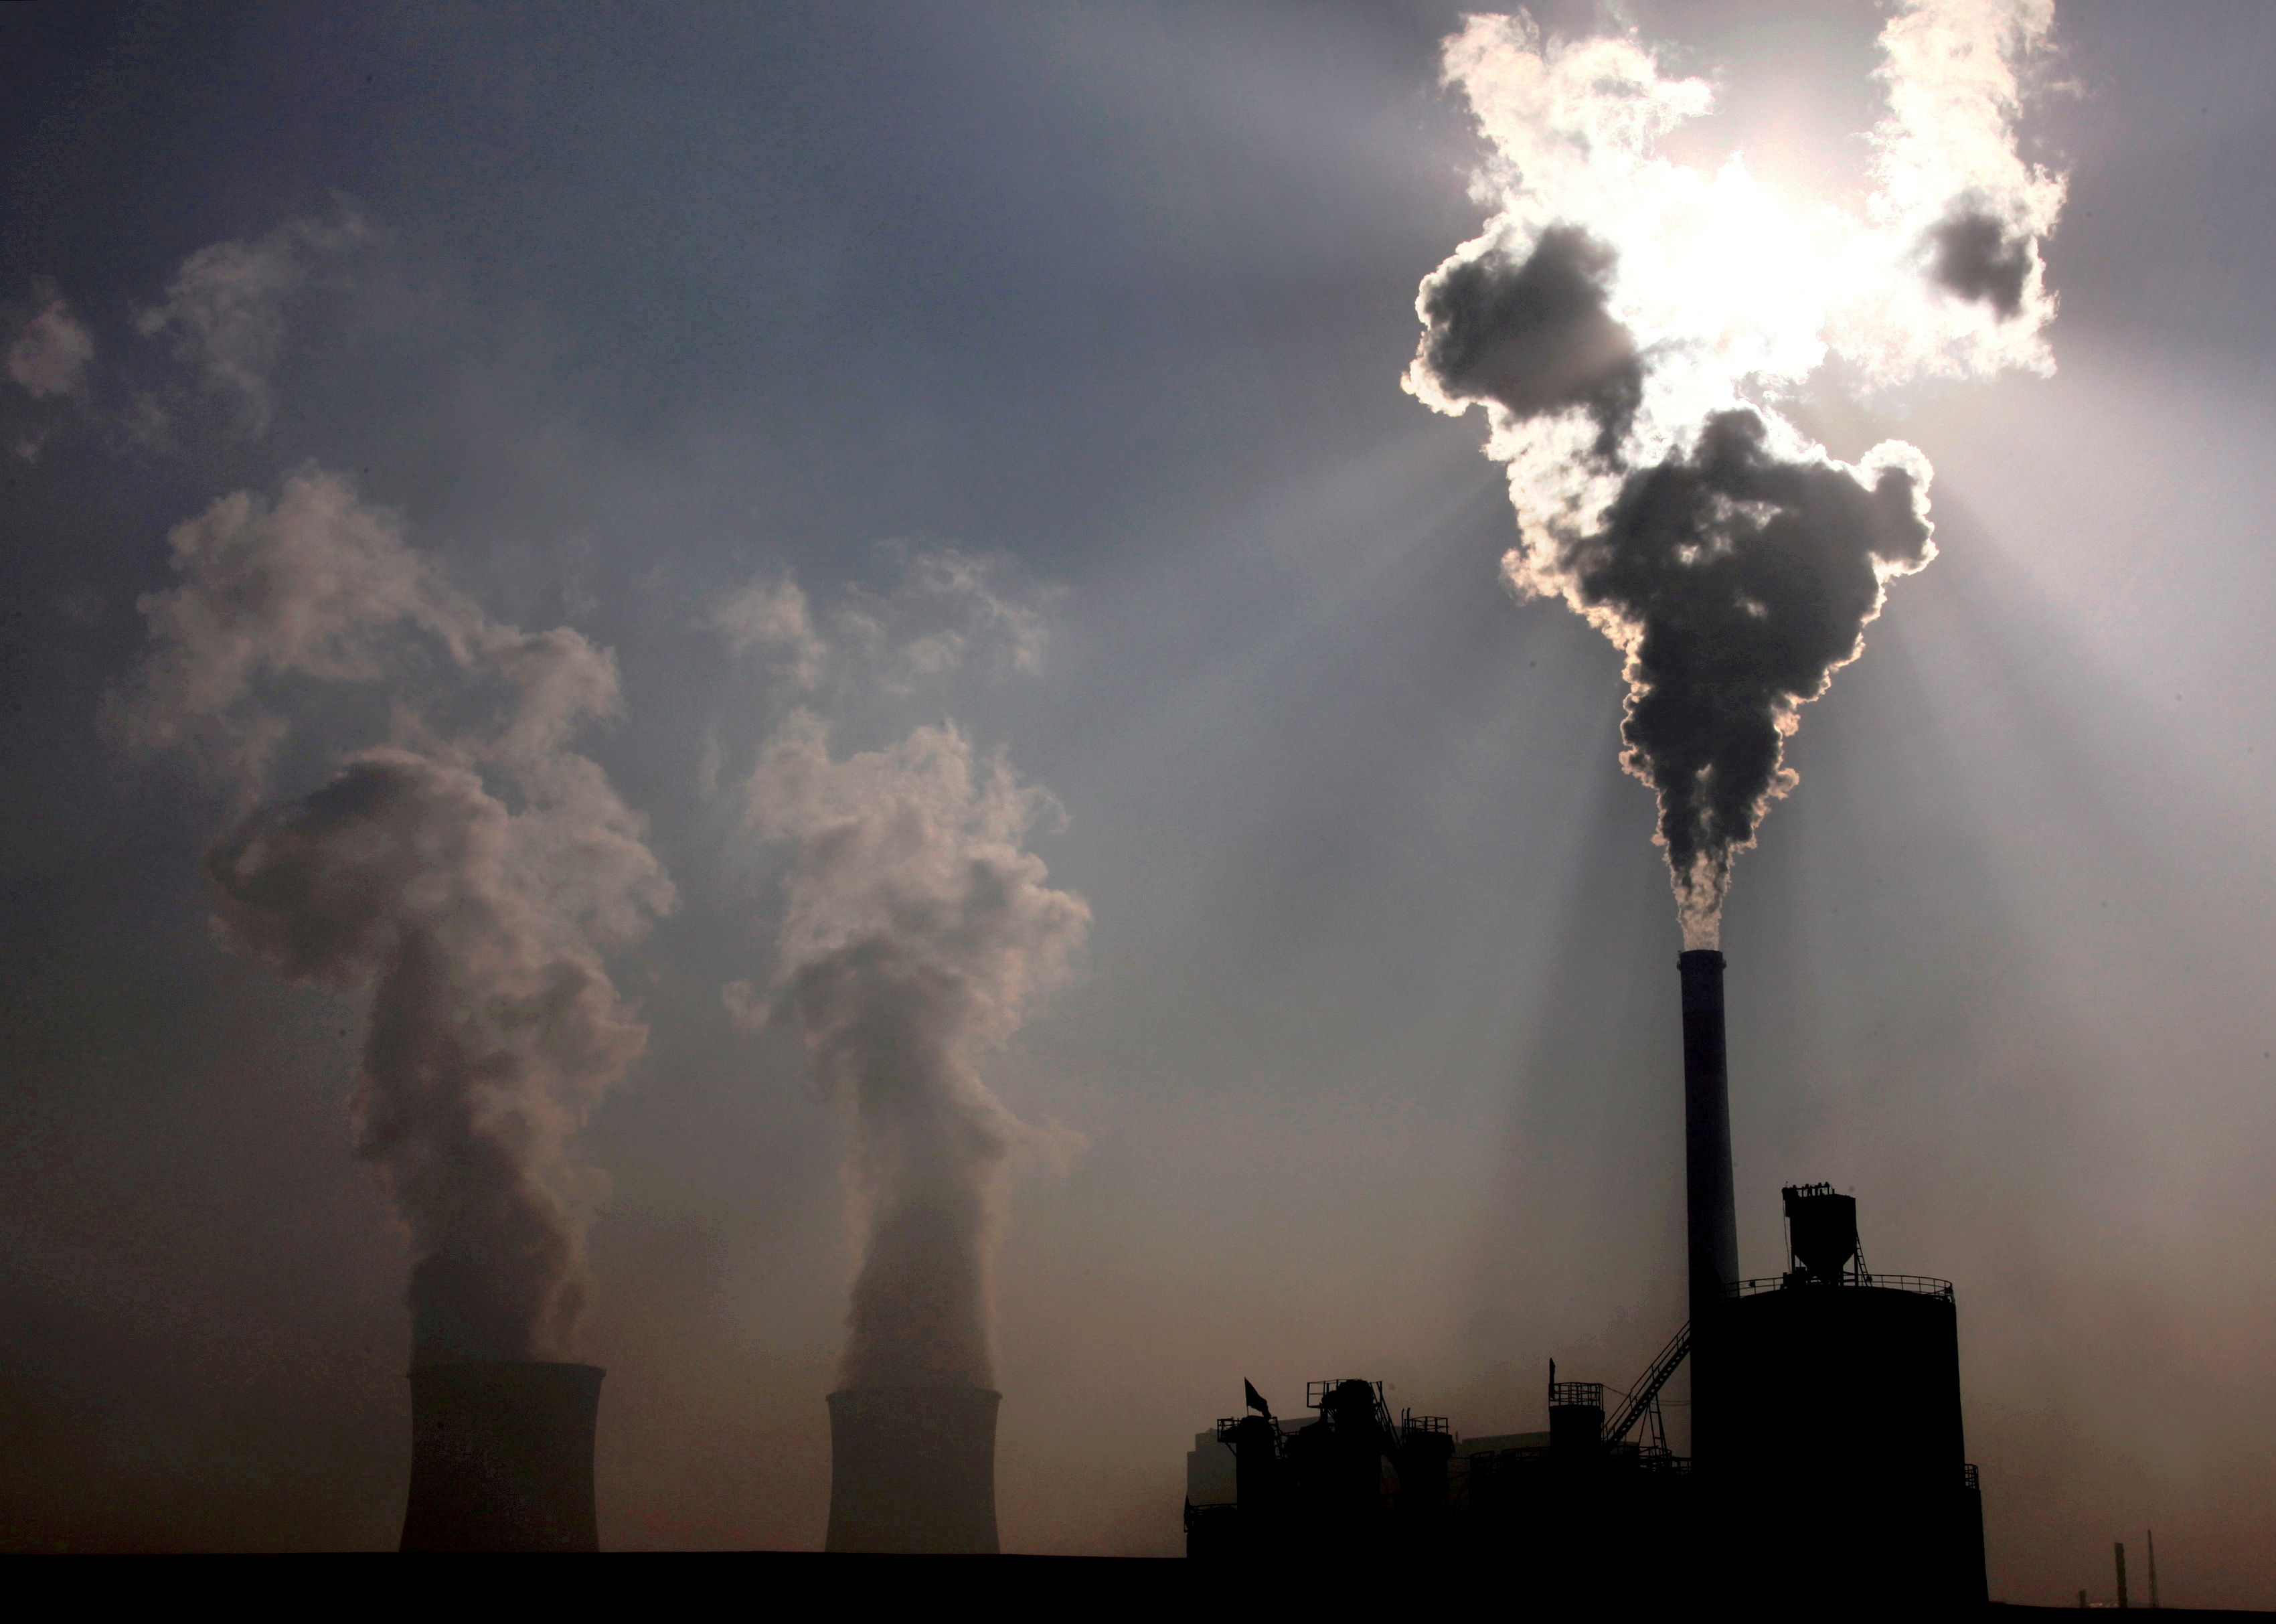 Study: The price on CO2 emissions must become the central element